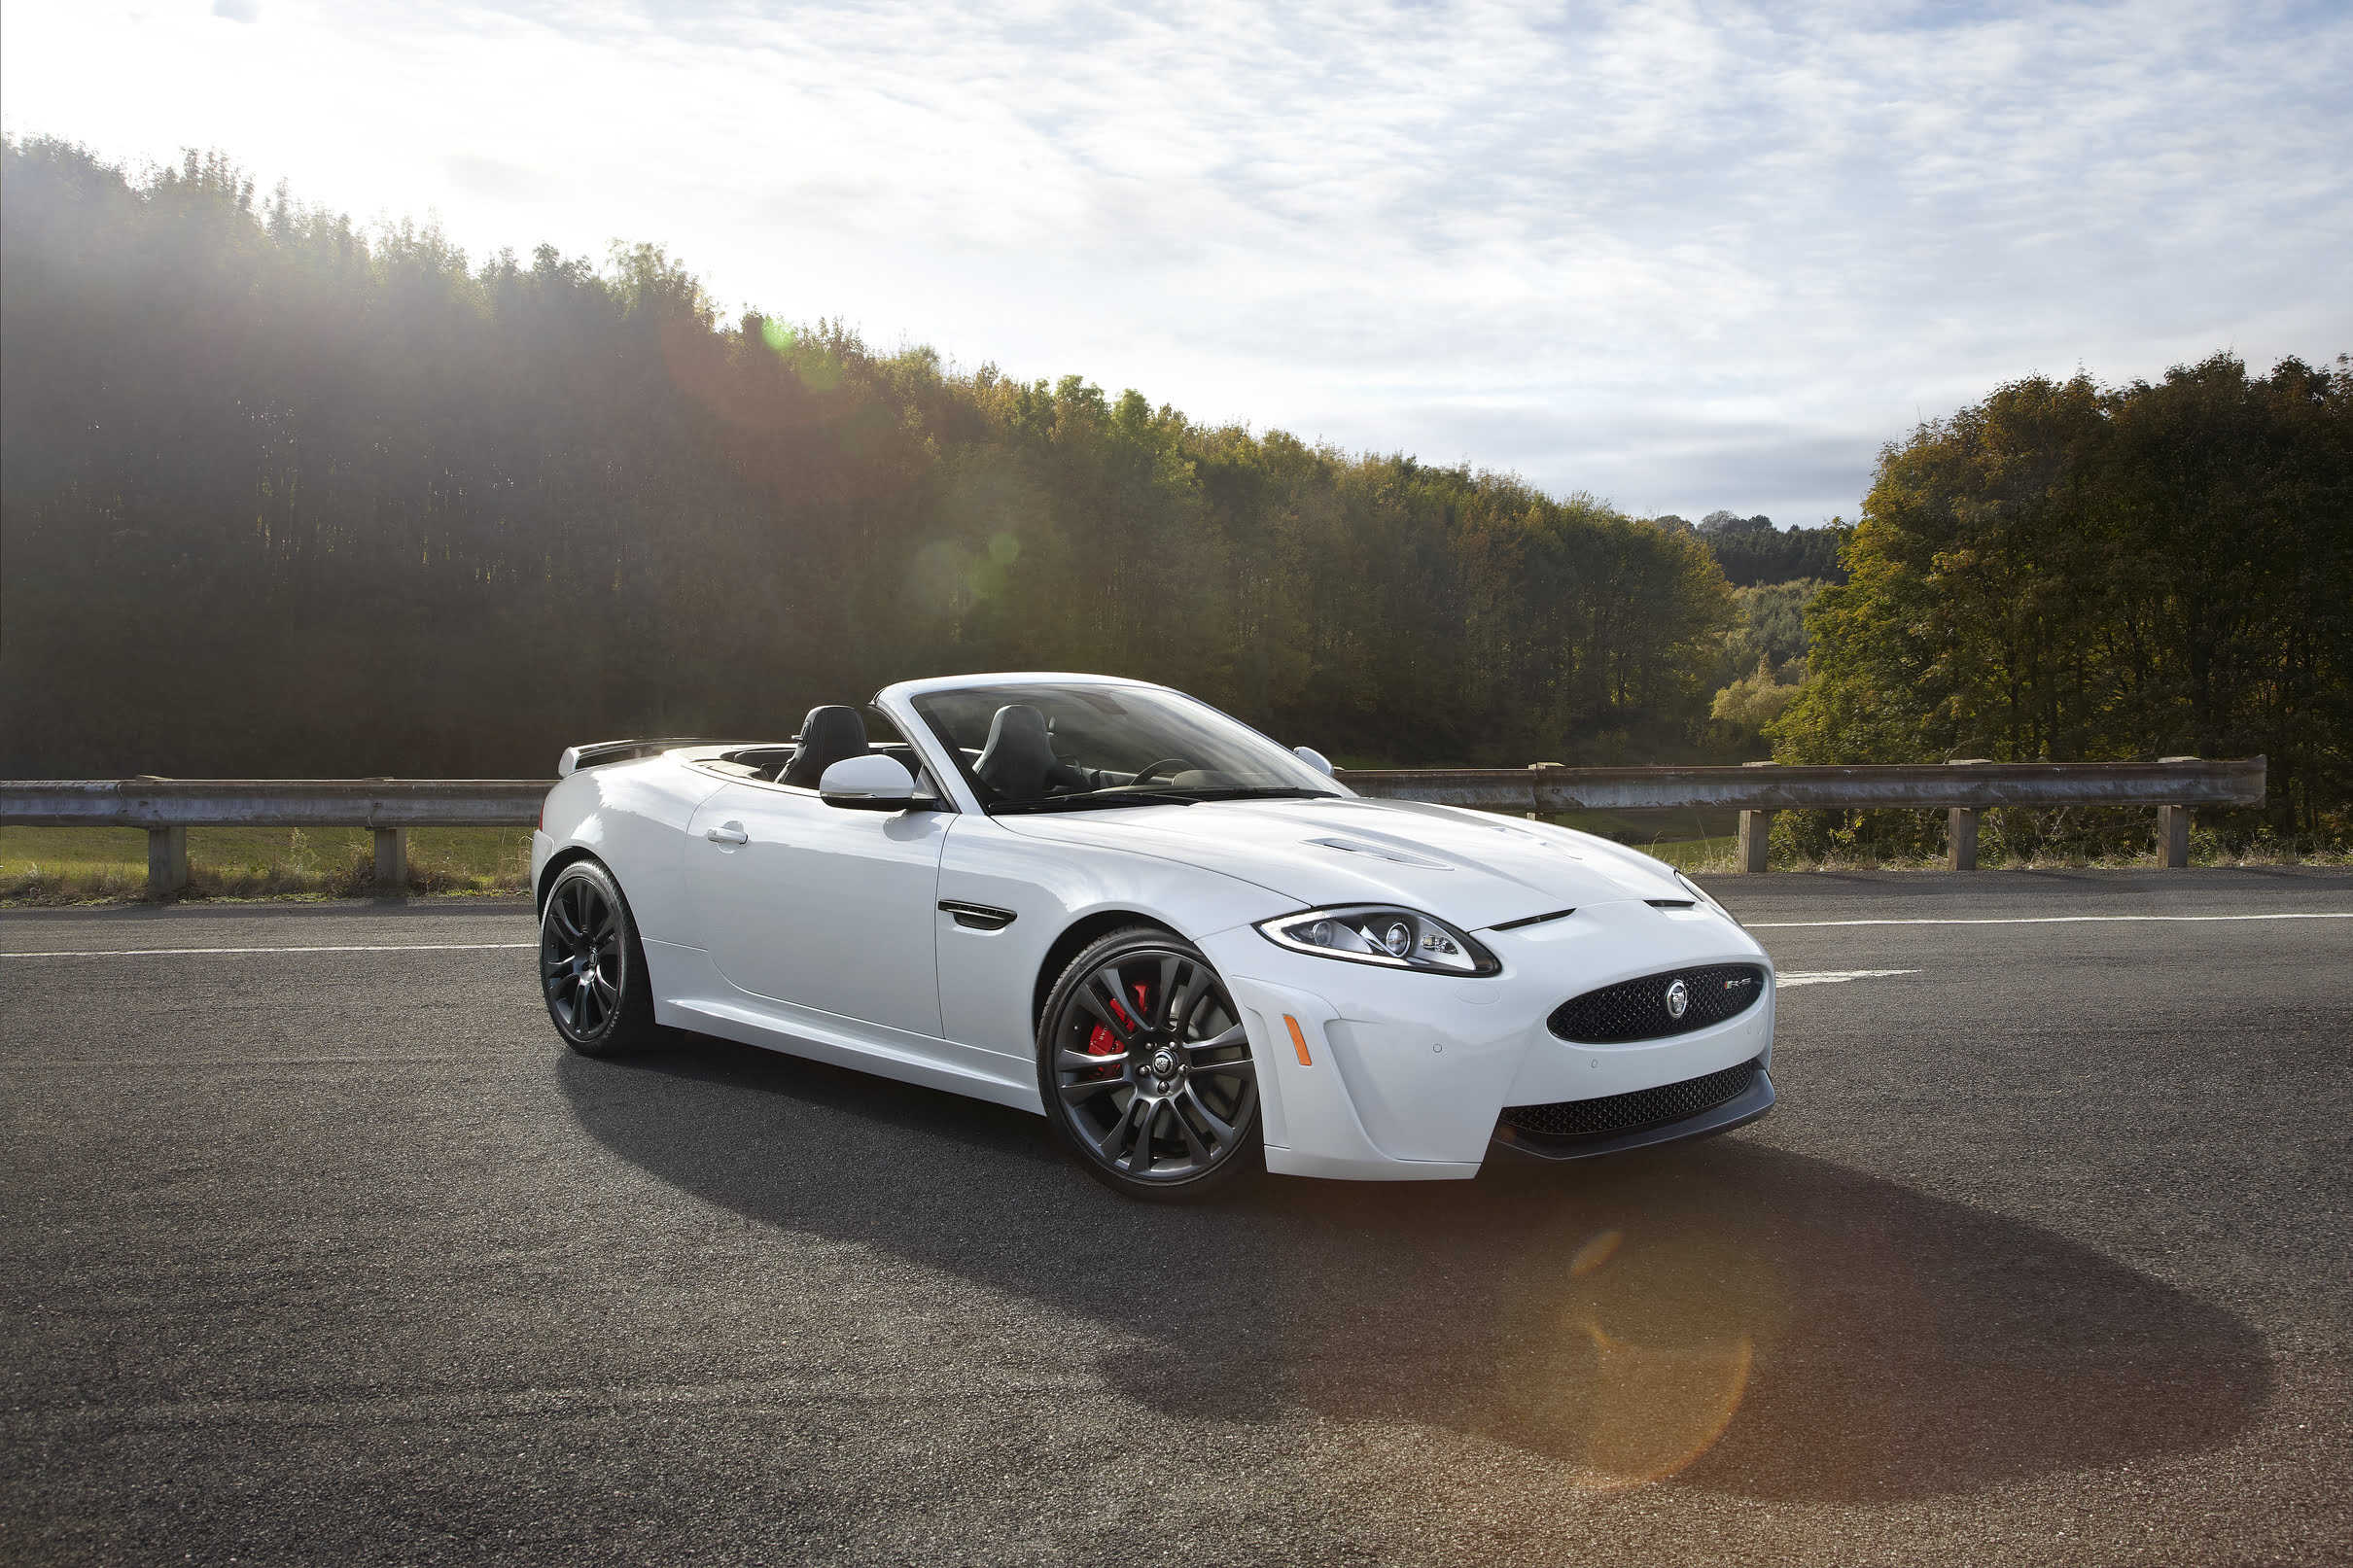 A black Jaguar XK convertible cruising along a scenic road, showcasing its sleek design and open-air driving experience in a luxurious setting.